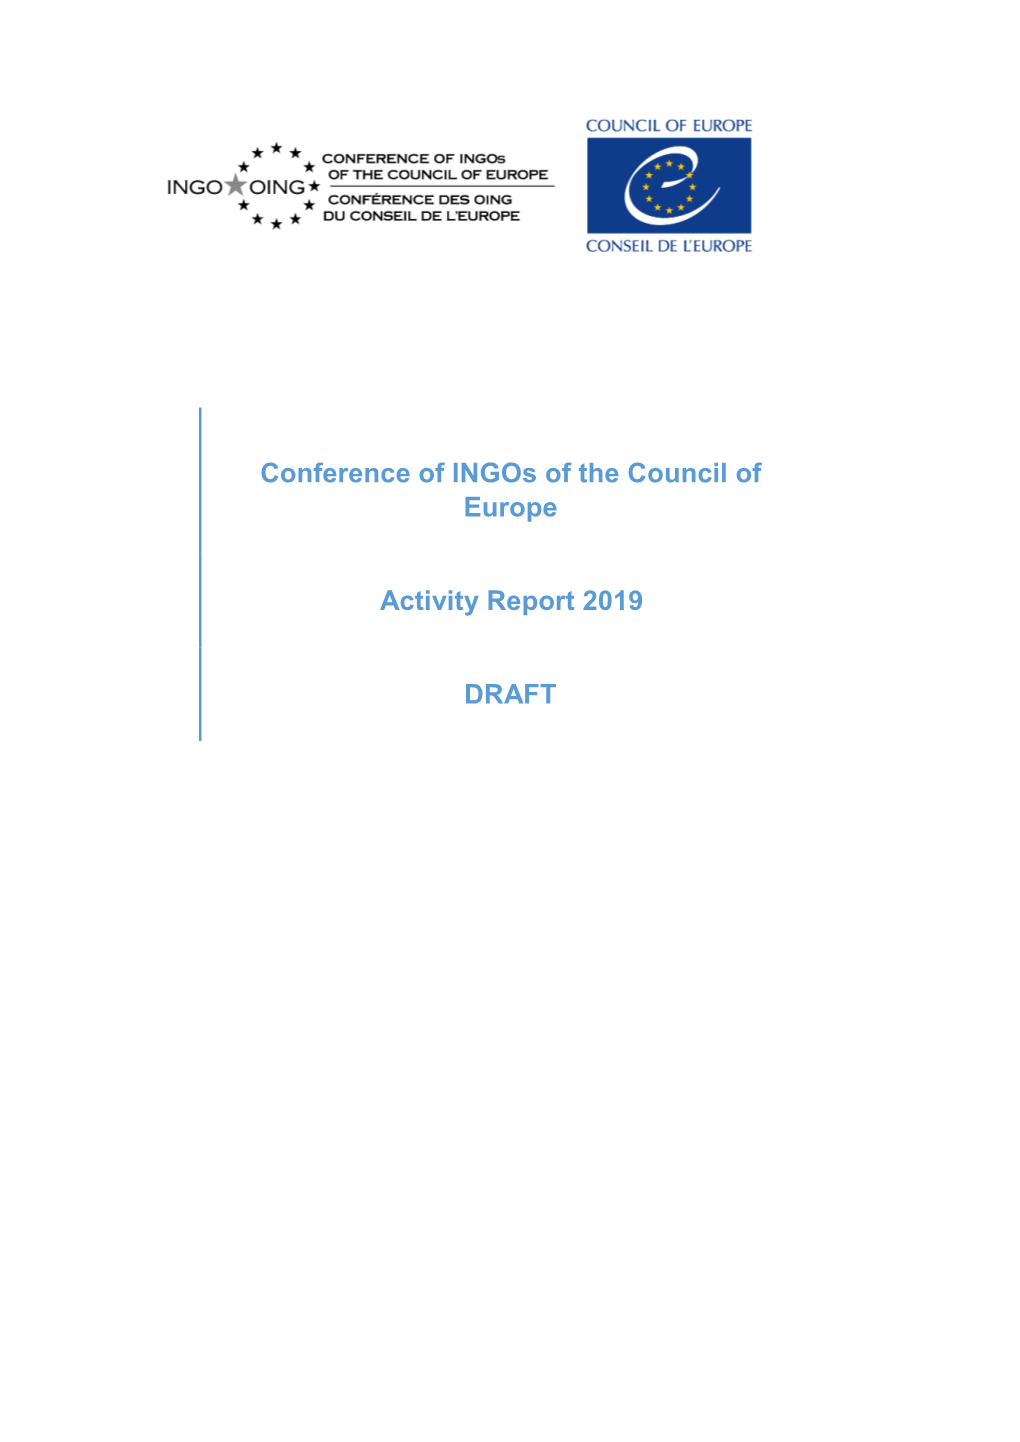 2019 Annual Activity Report of the Conference of Ingos